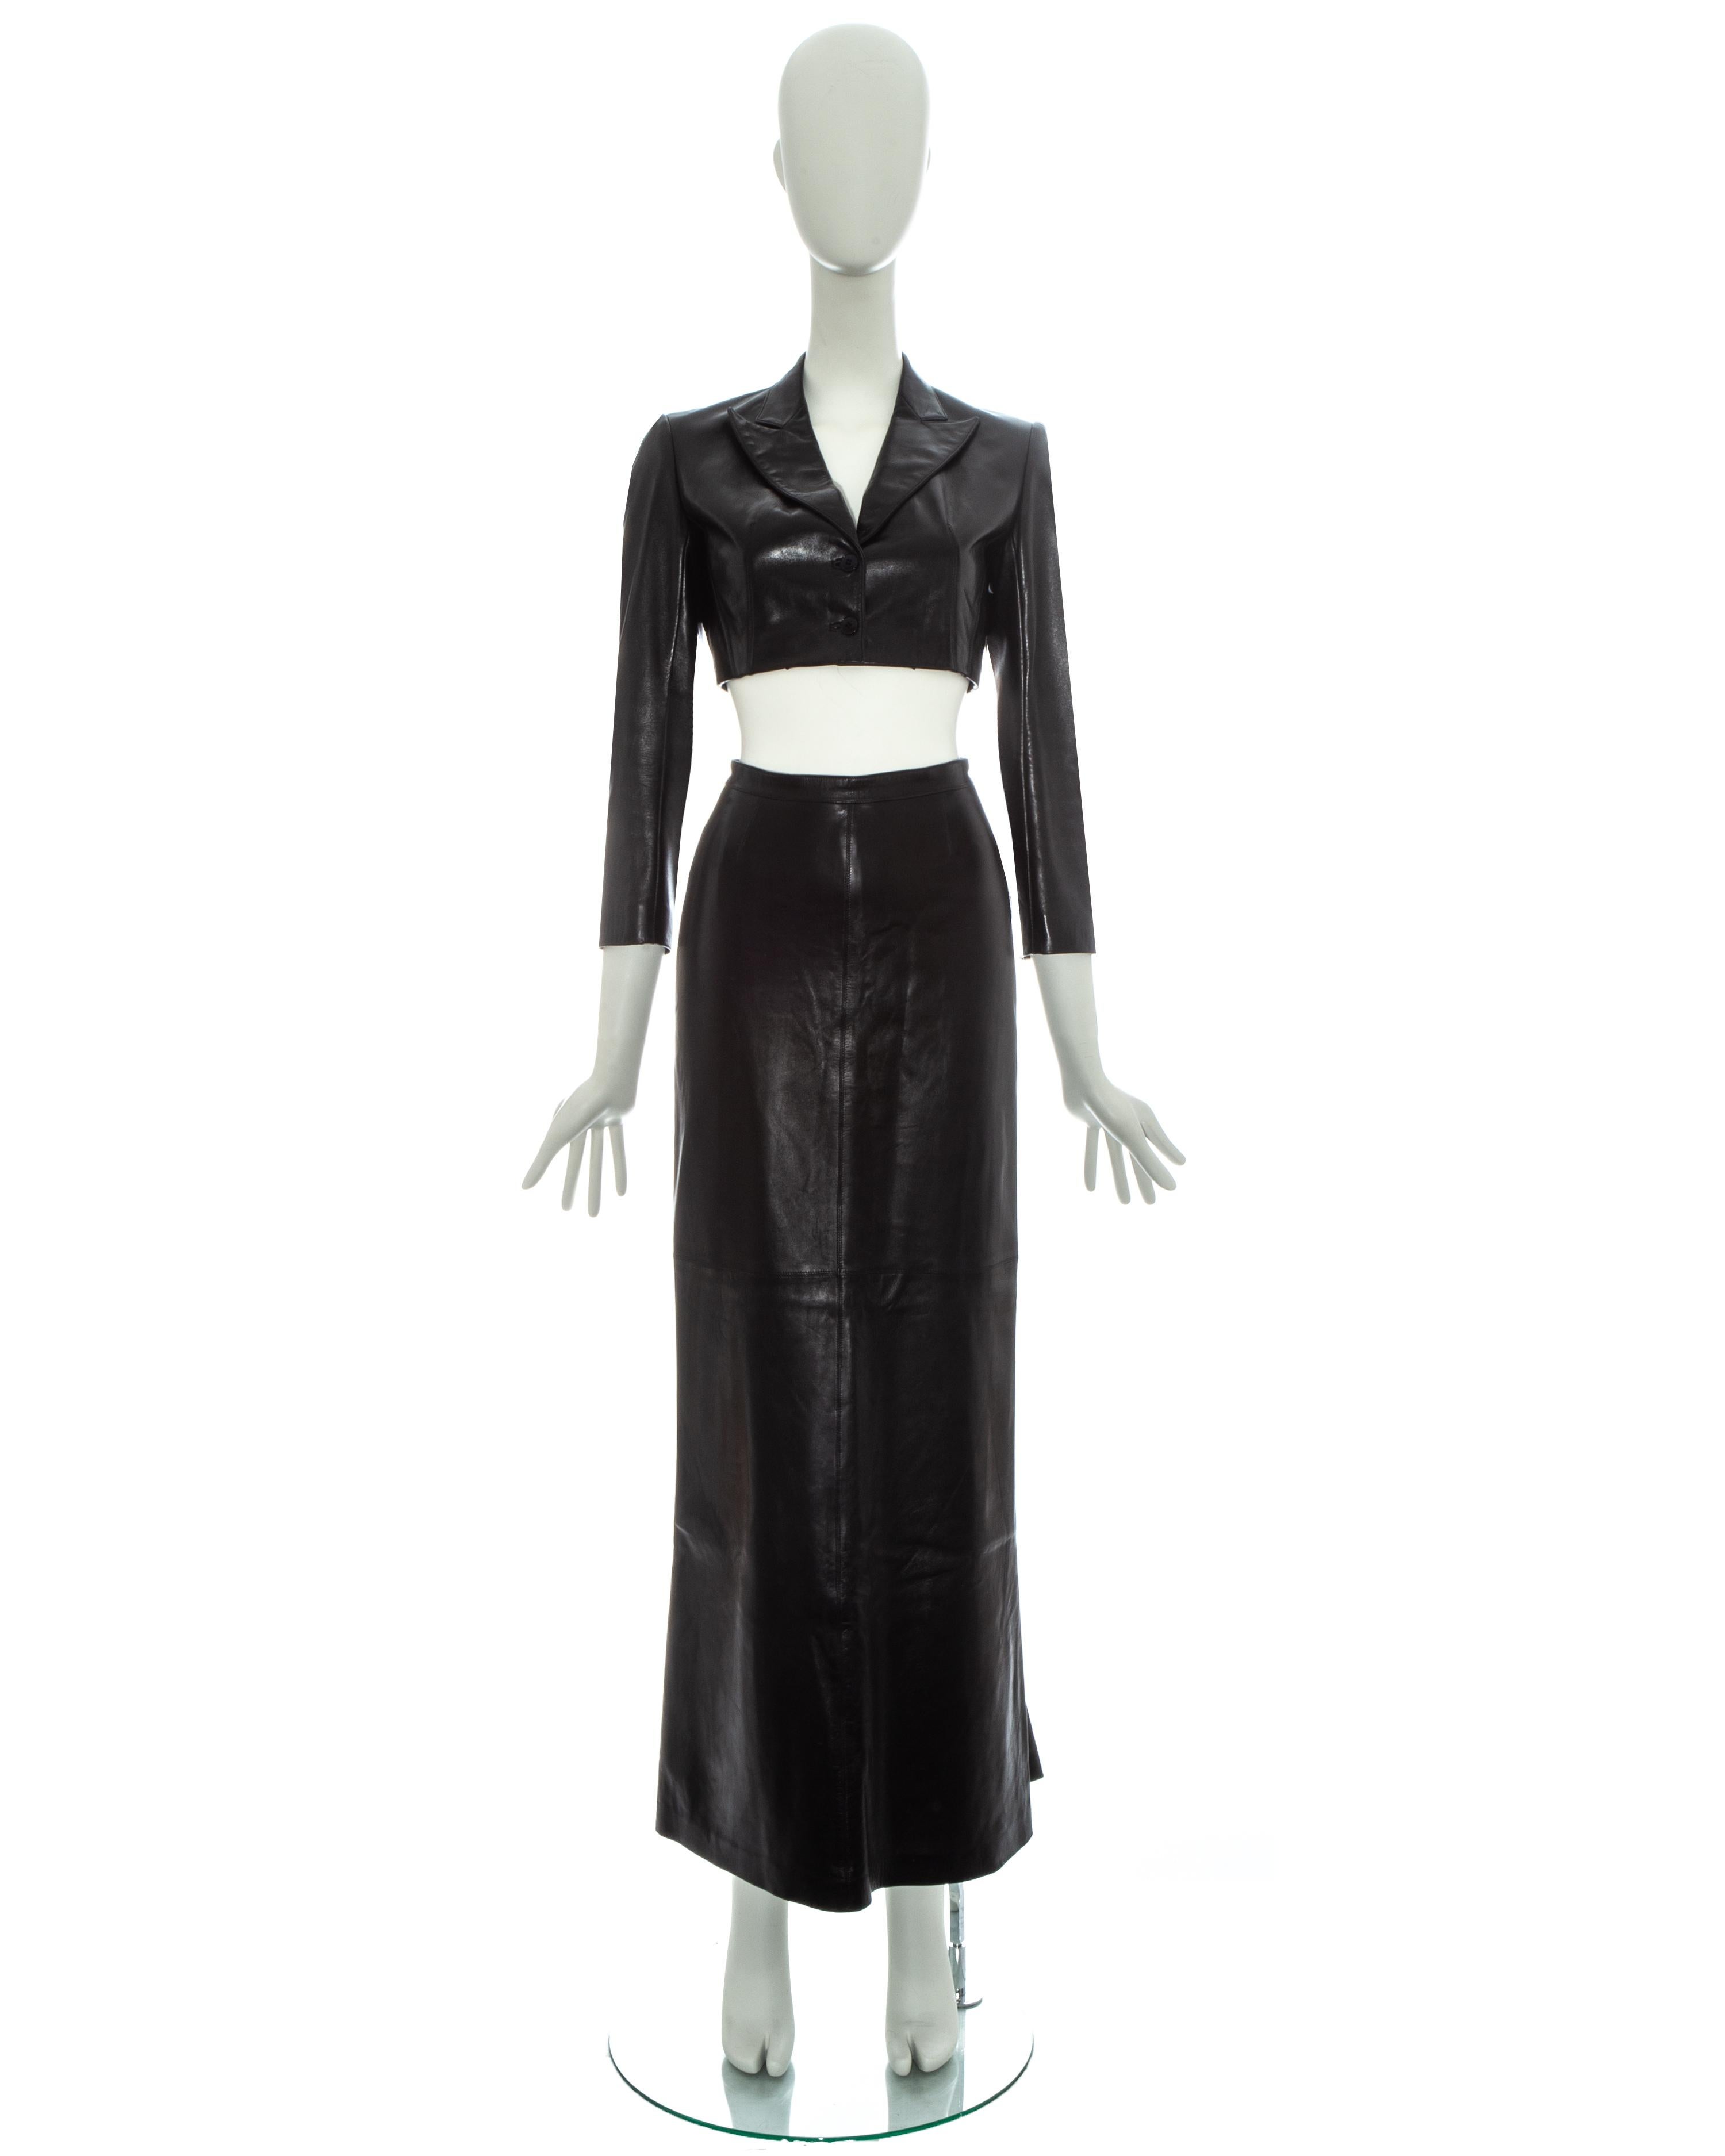 Azzedine Alaia black leather cropped structured blazer jacket with matching fishtail maxi skirt

Spring-Summer 1992
